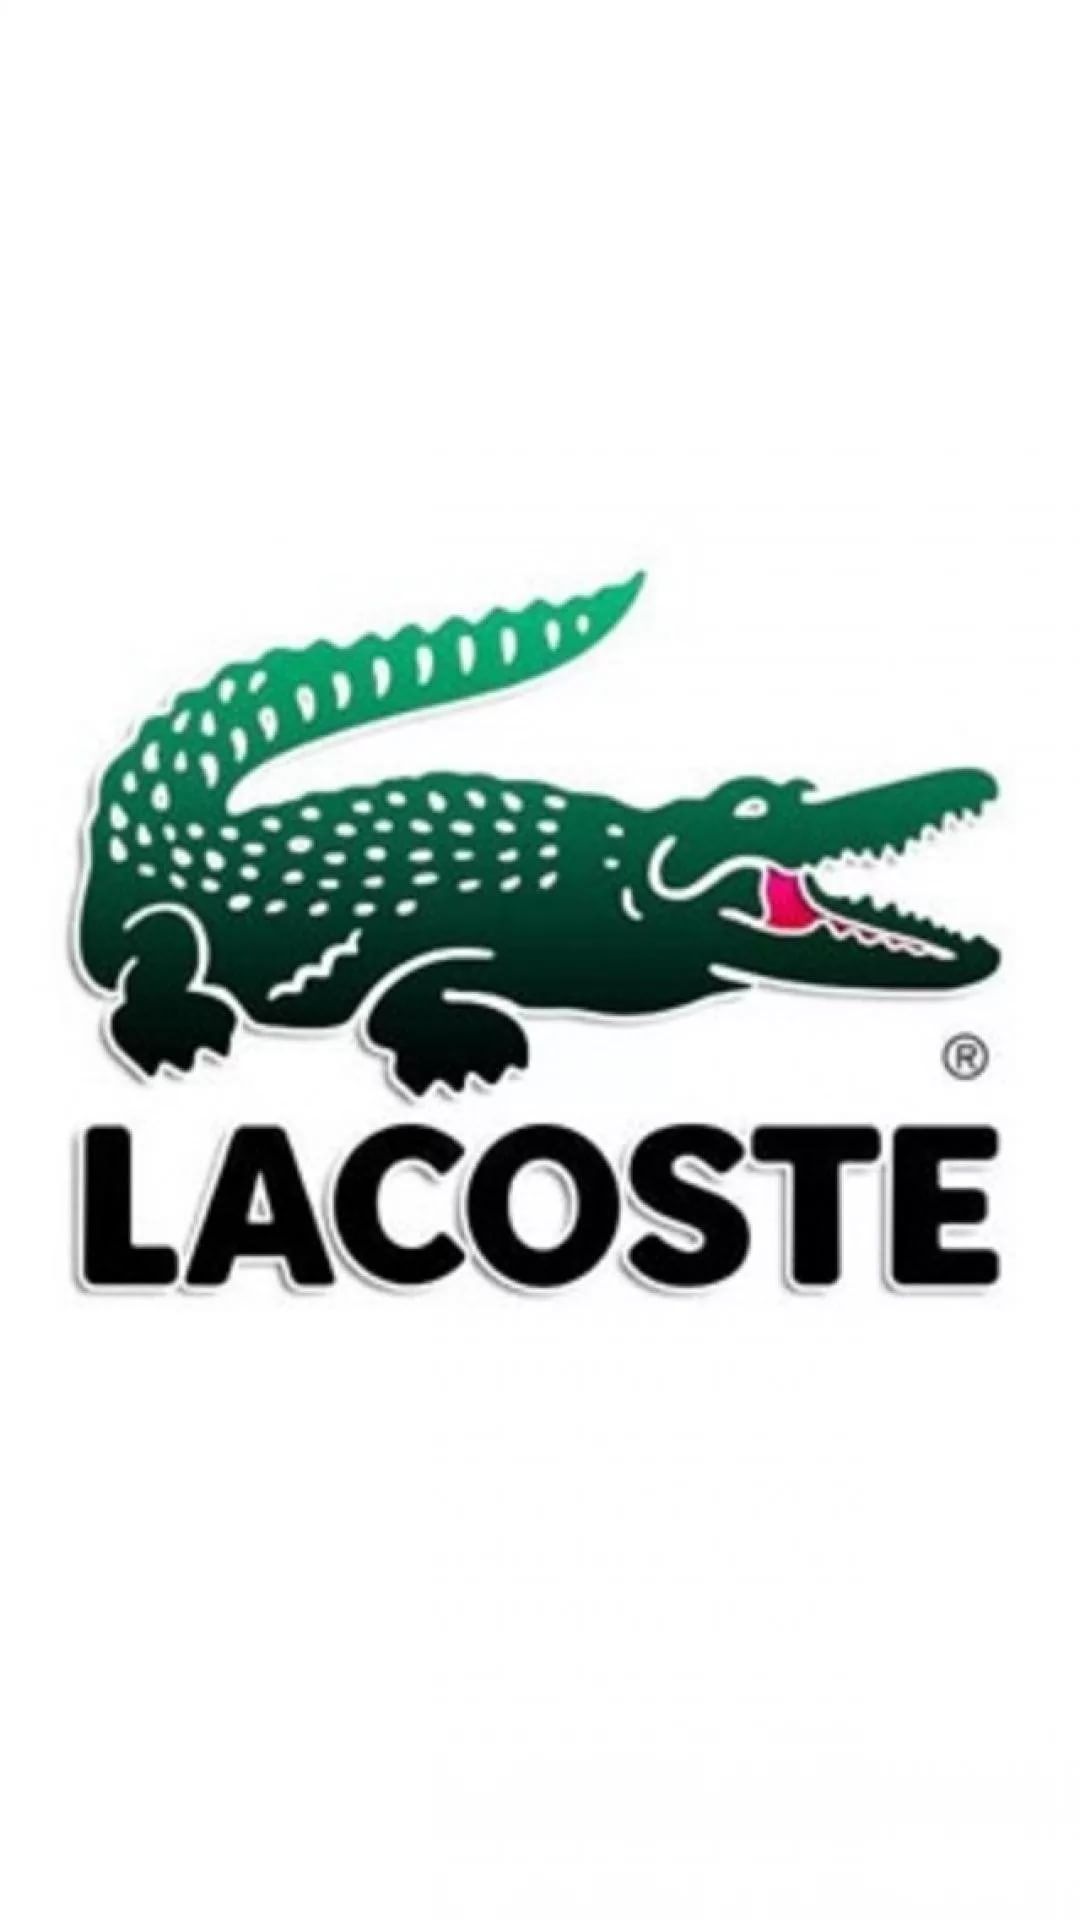 Lacoste Wallpapers